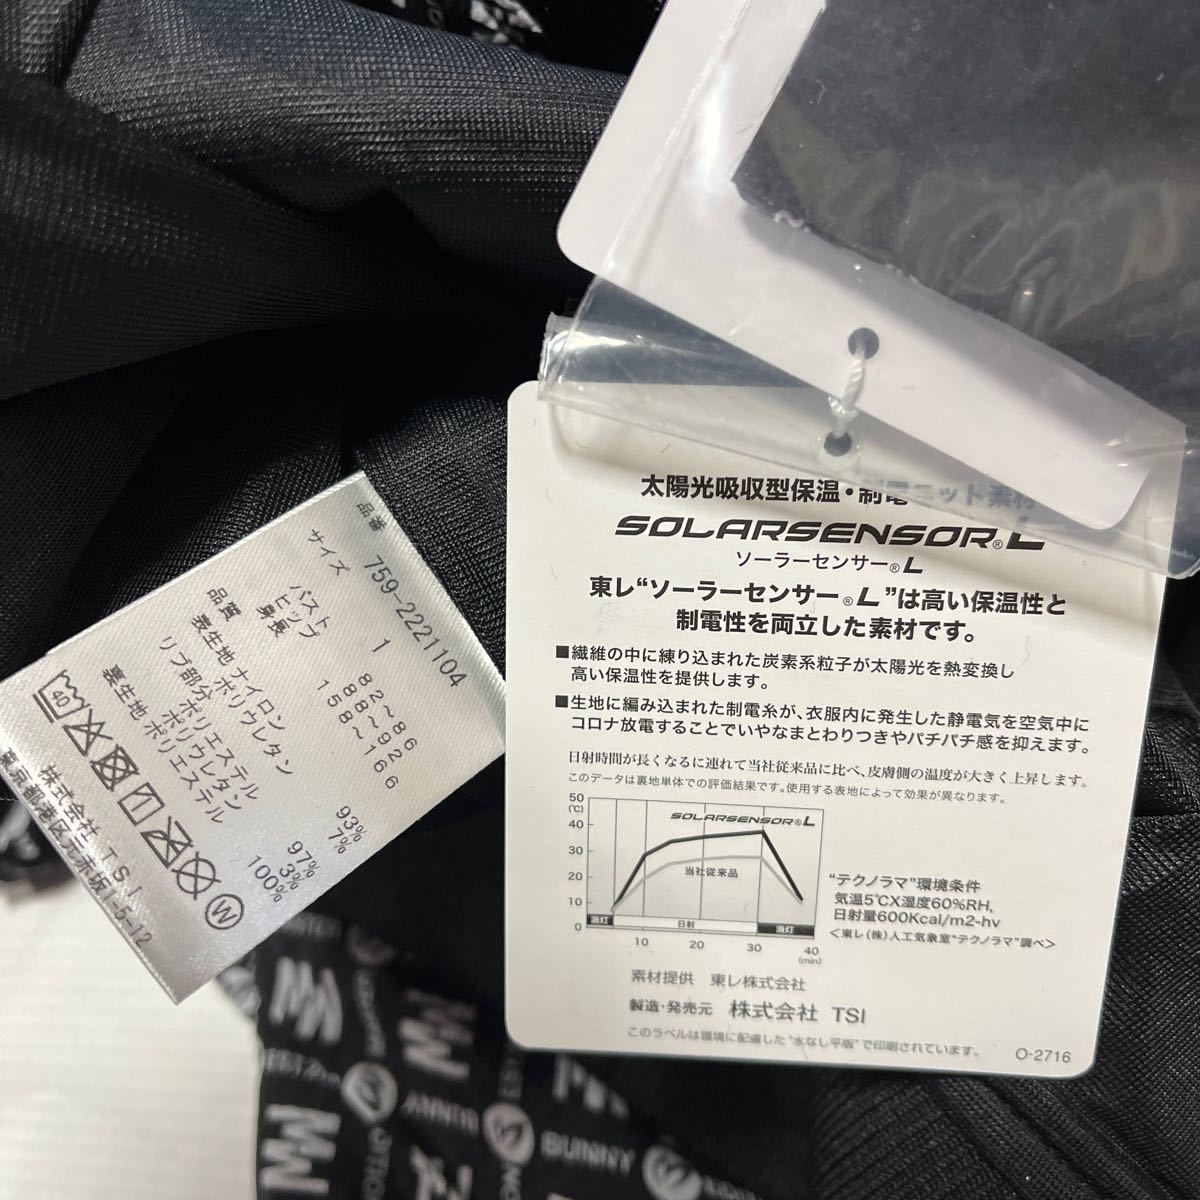  new goods regular goods master ba knee Pearly Gates size 1 twin s need thermal storage heat insulation stretch lining solar sensor black free shipping 